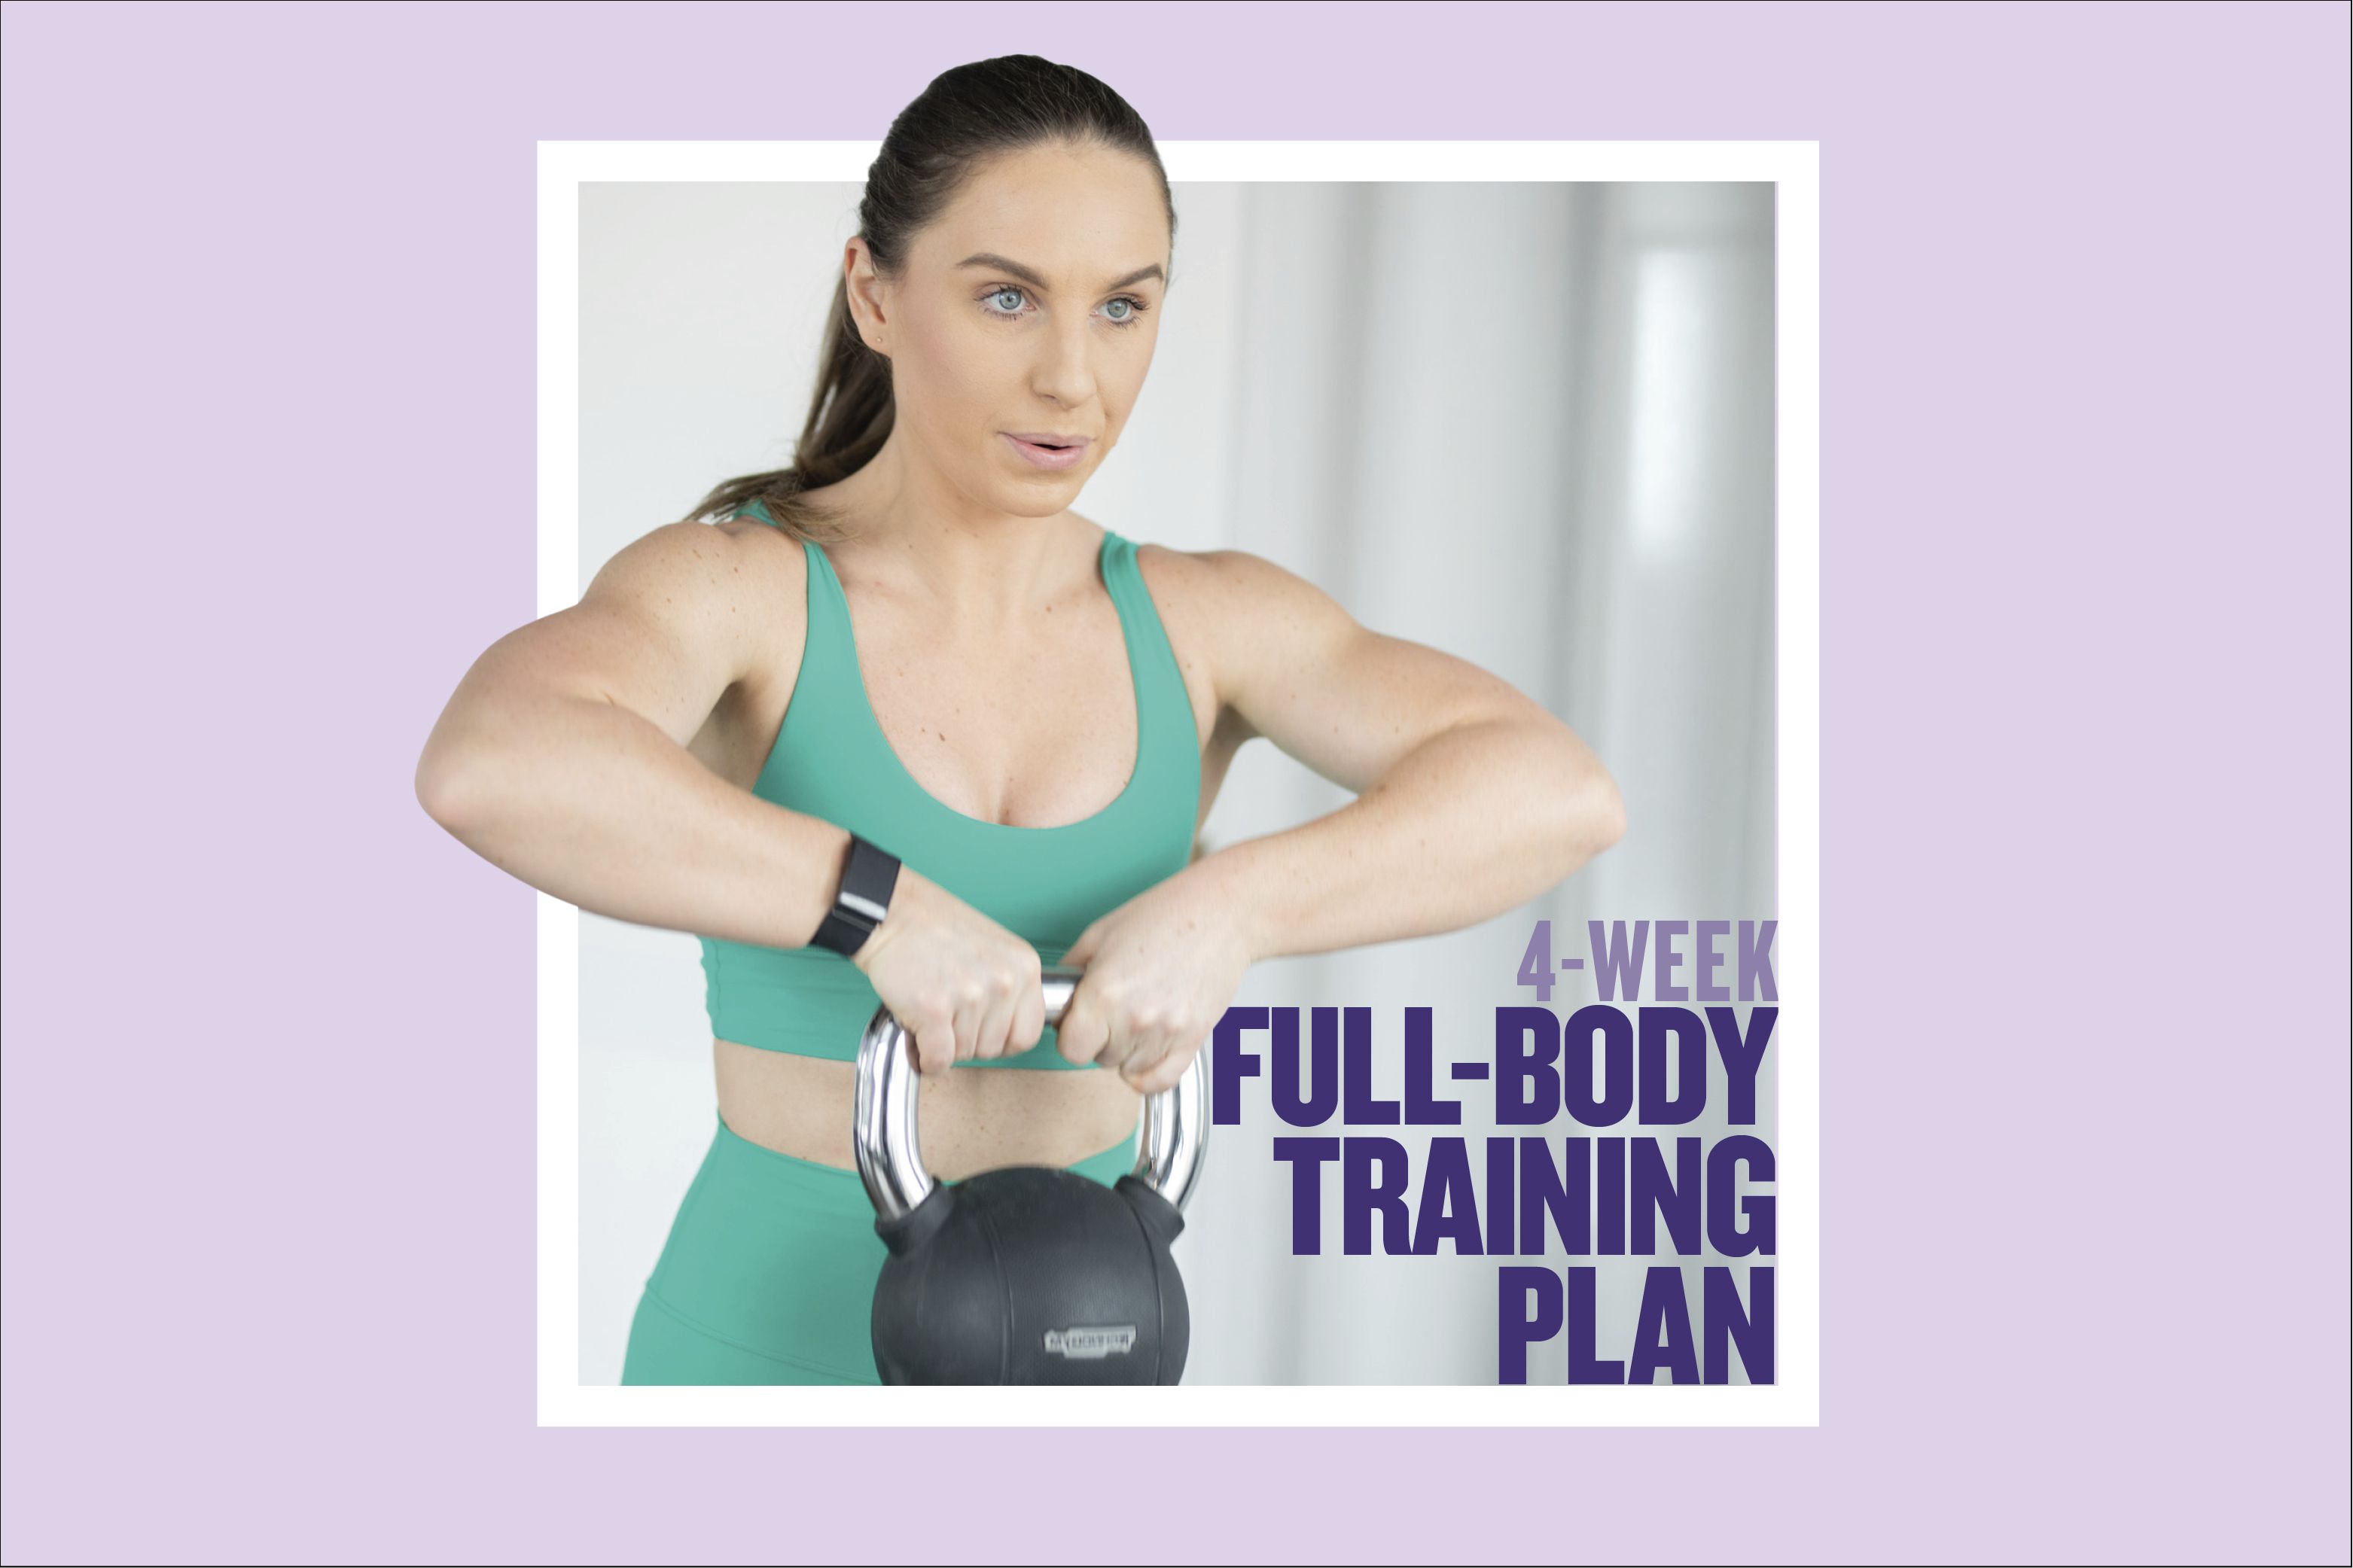 Feel fit in 4: Your full-body summer training plan